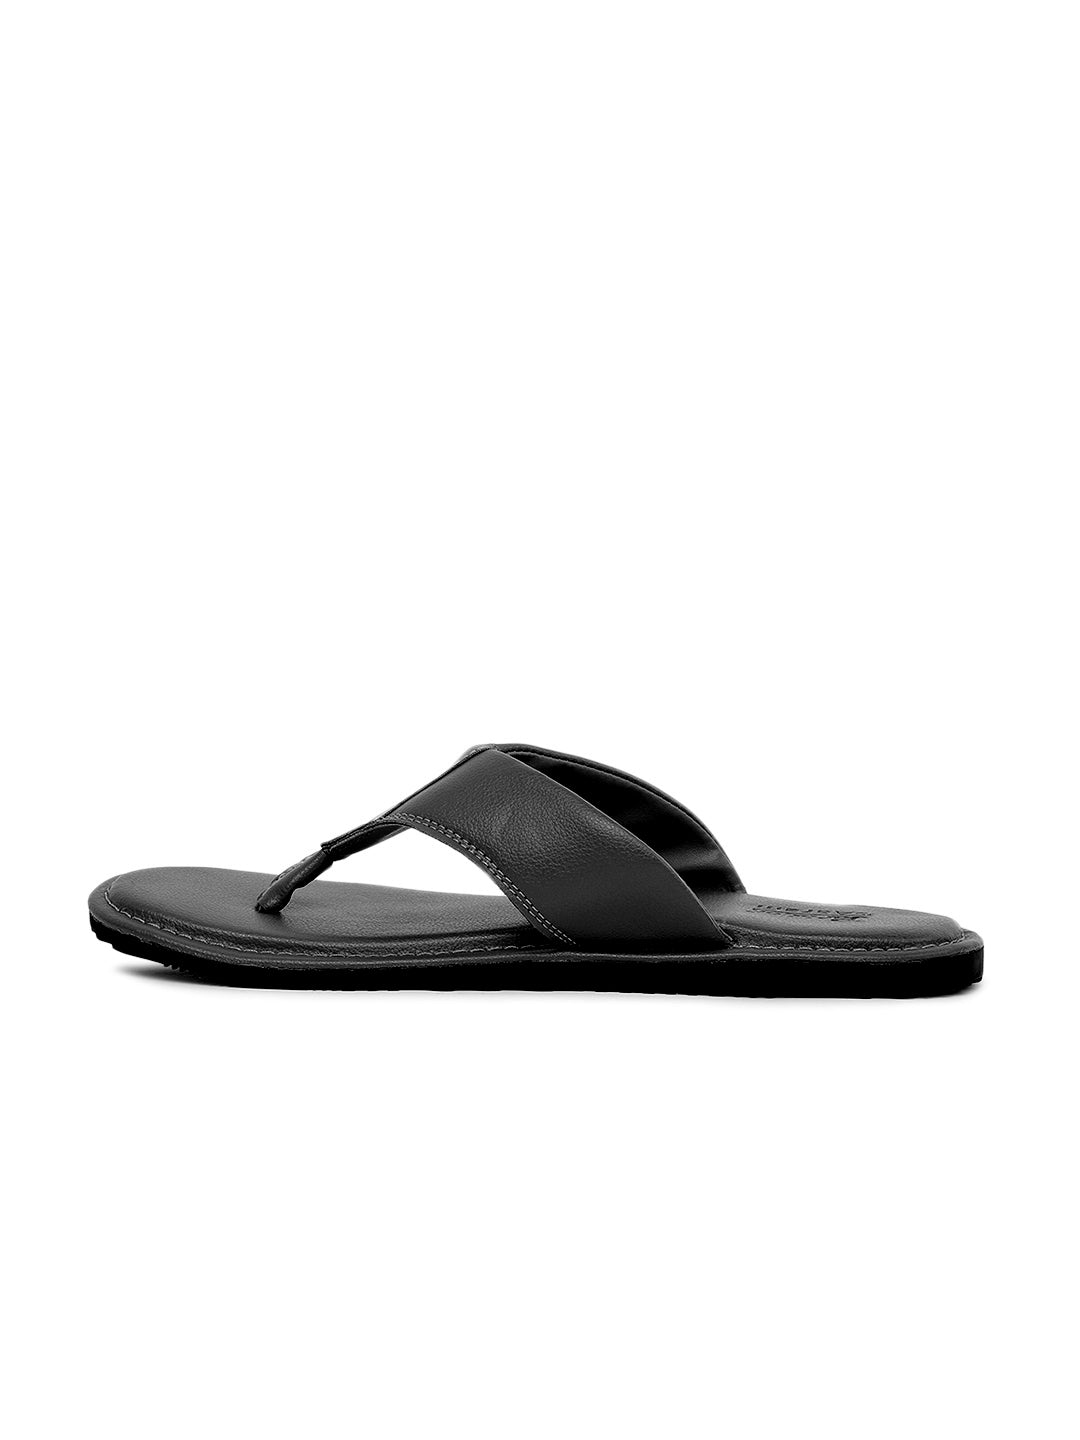 Paragon RFB2905G Men Stylish Lightweight Flipflops | Comfortable with Anti skid soles | Casual &amp; Trendy Slippers | Indoor &amp; Outdoor